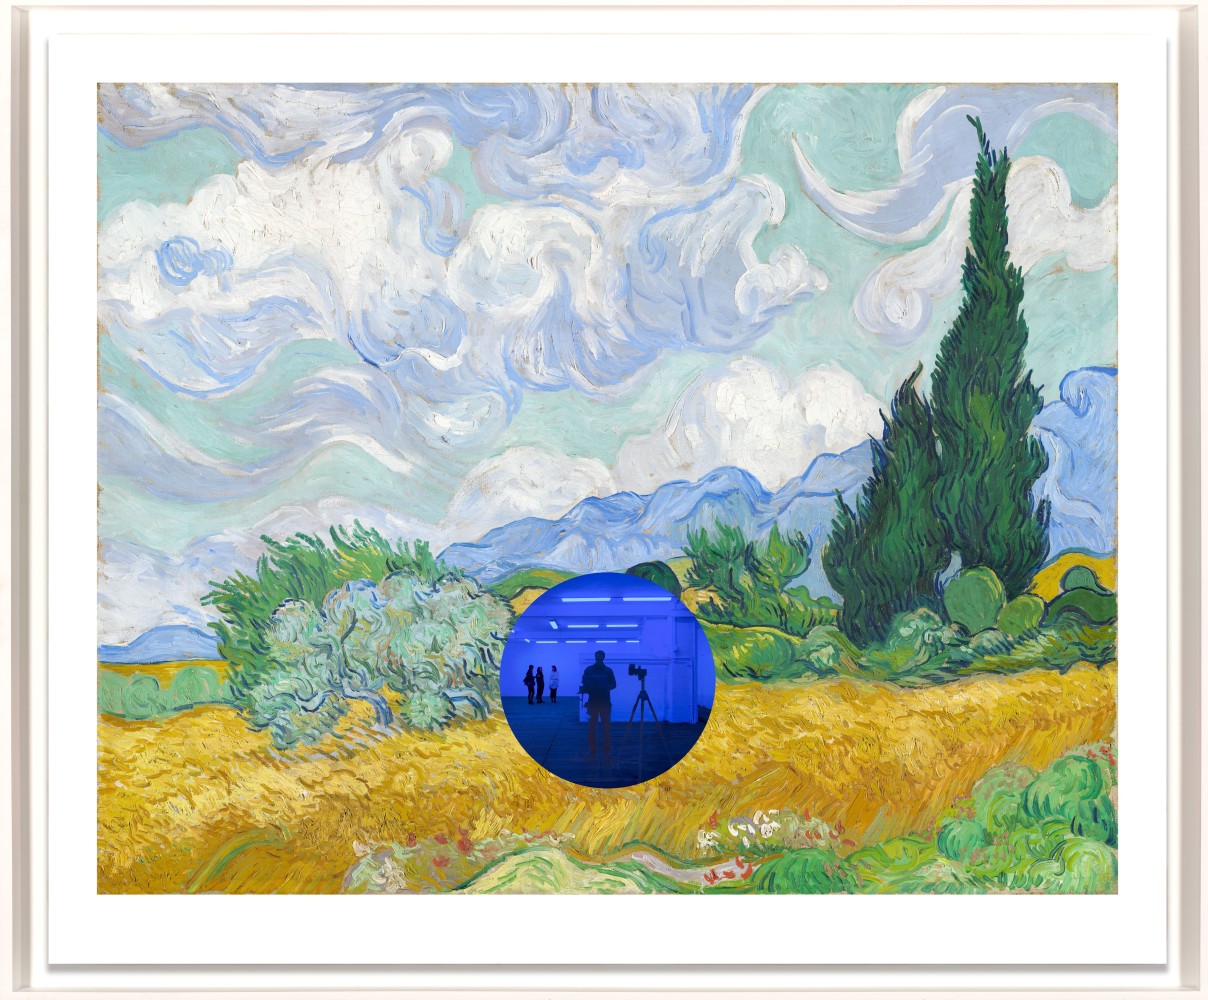 Gazing Ball (van Gogh Wheatfield with Cypresses), 2017
Archival pigment print on Innova rag paper, glass
35 3/8 x 42 3/16 inches
Edition of 20